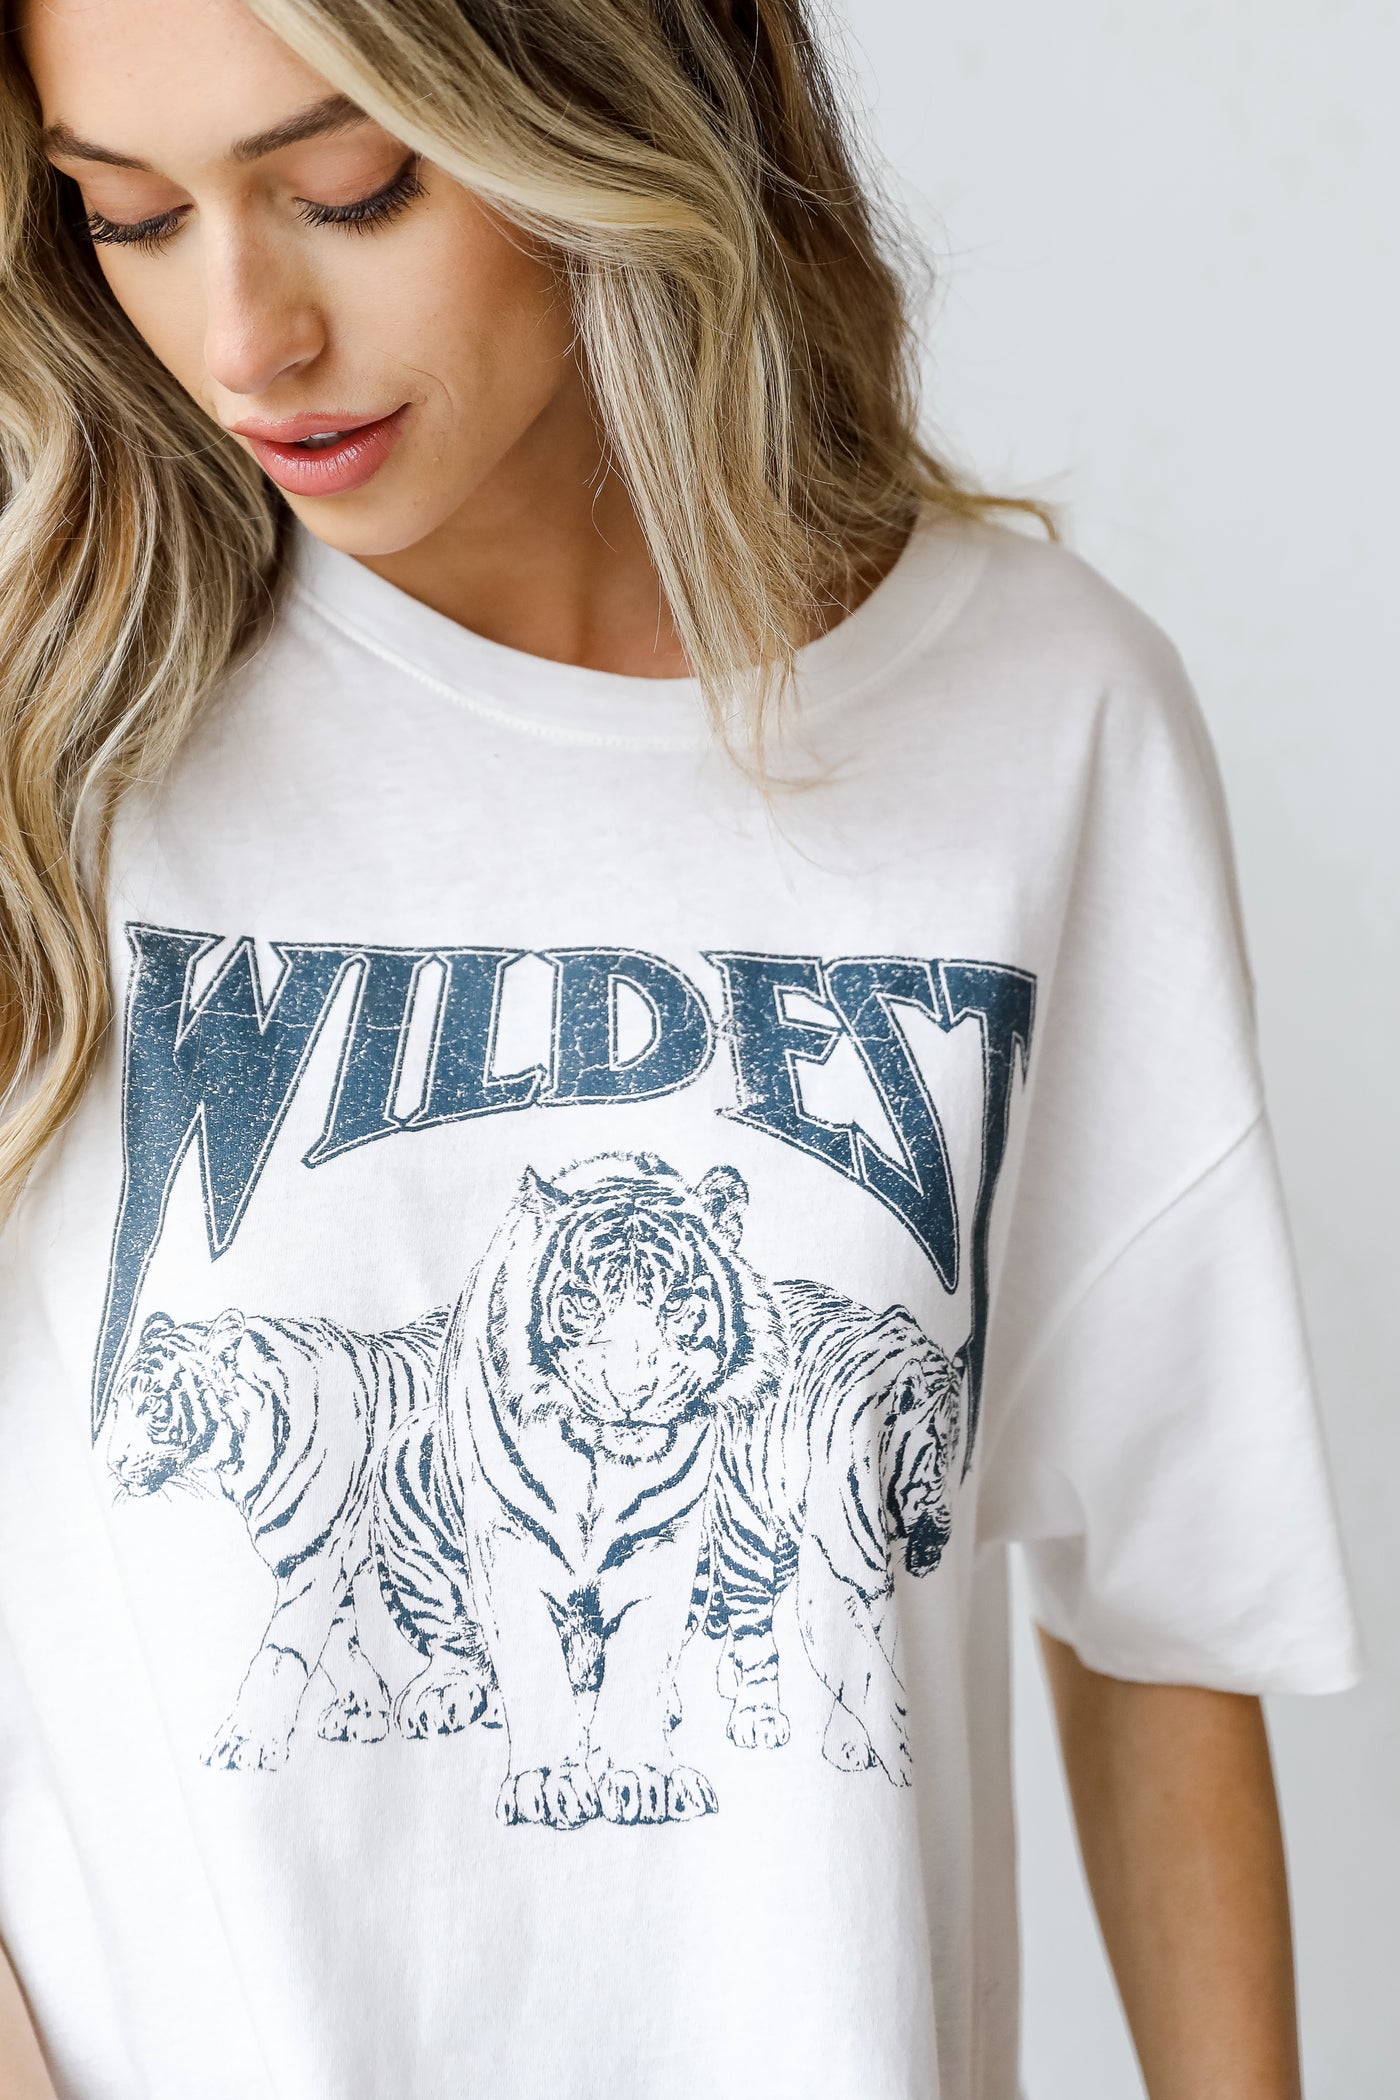 Wildest Graphic Tee from dress up